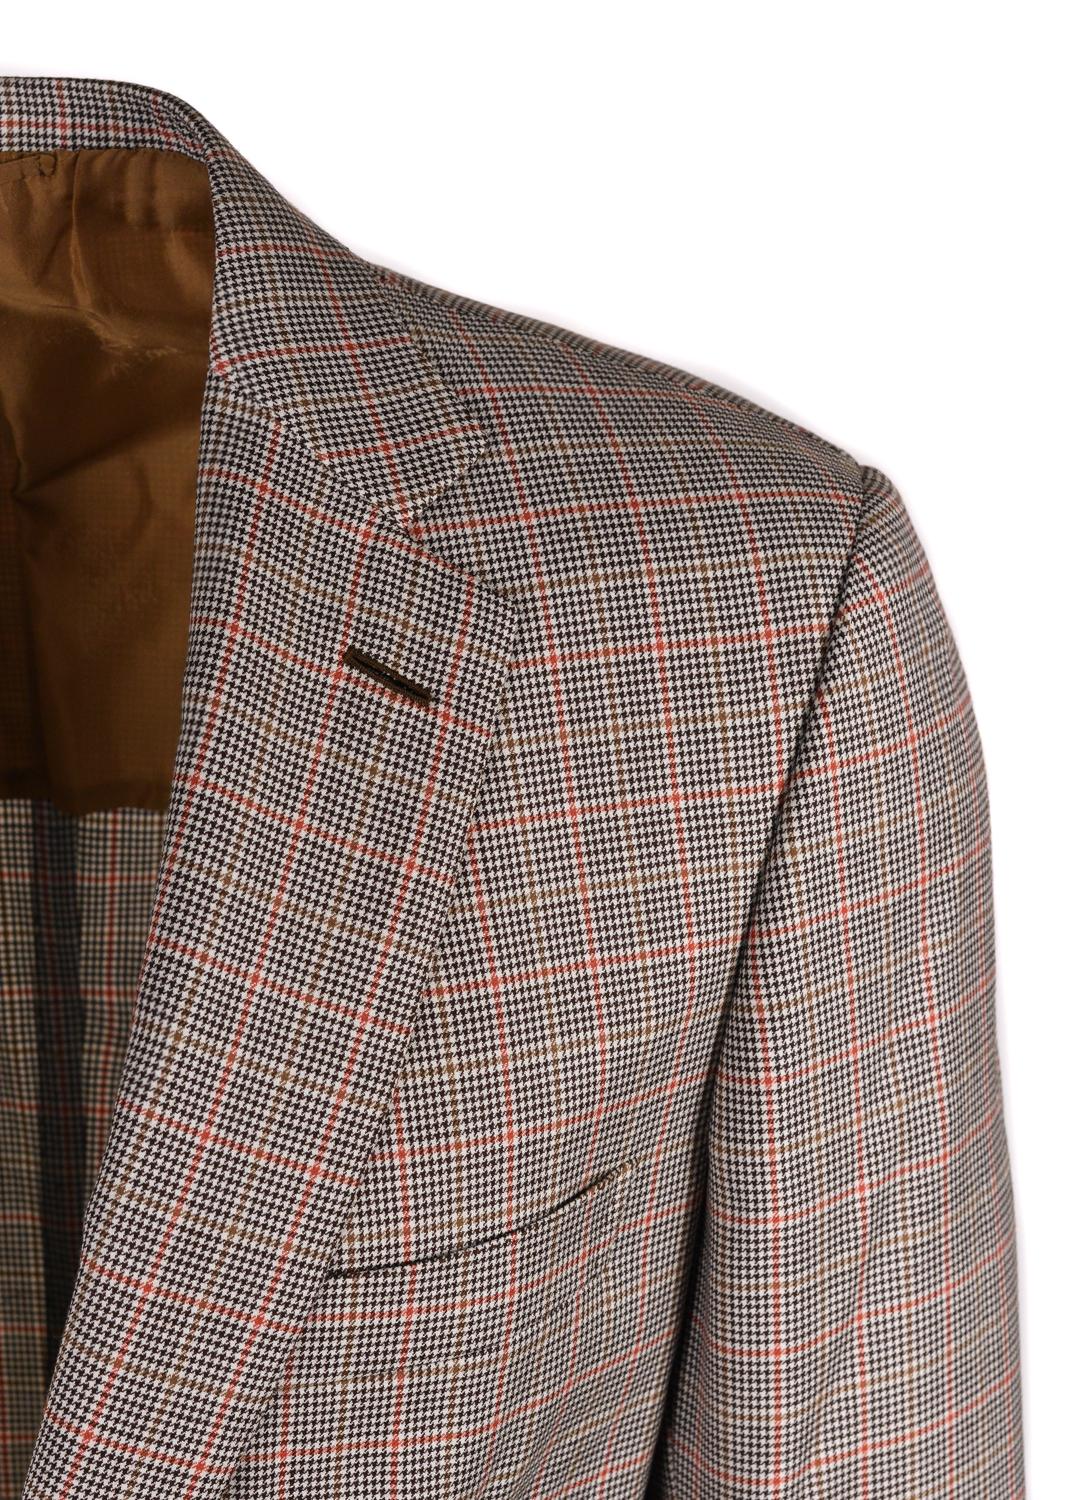 Men's Brioni Men Brown Wool Houndstooth Check Colosseo Sportscoat For Sale